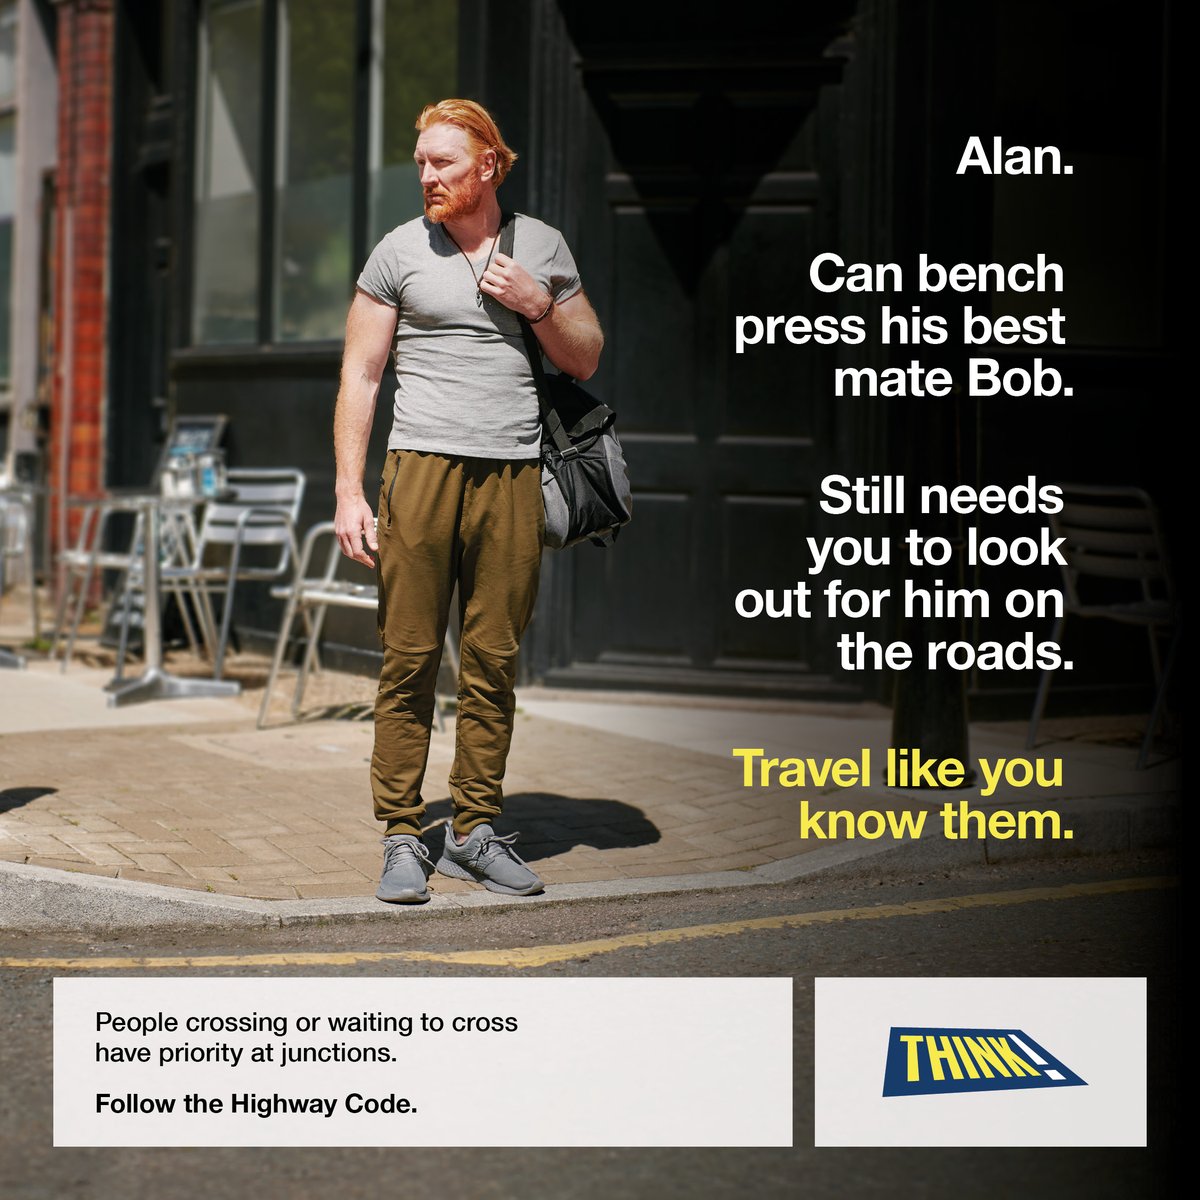 Whoever you meet on your journey, remember to give priority to people crossing or waiting to cross at junctions.

#TravelLikeYouKnowThem and follow the #HighwayCode